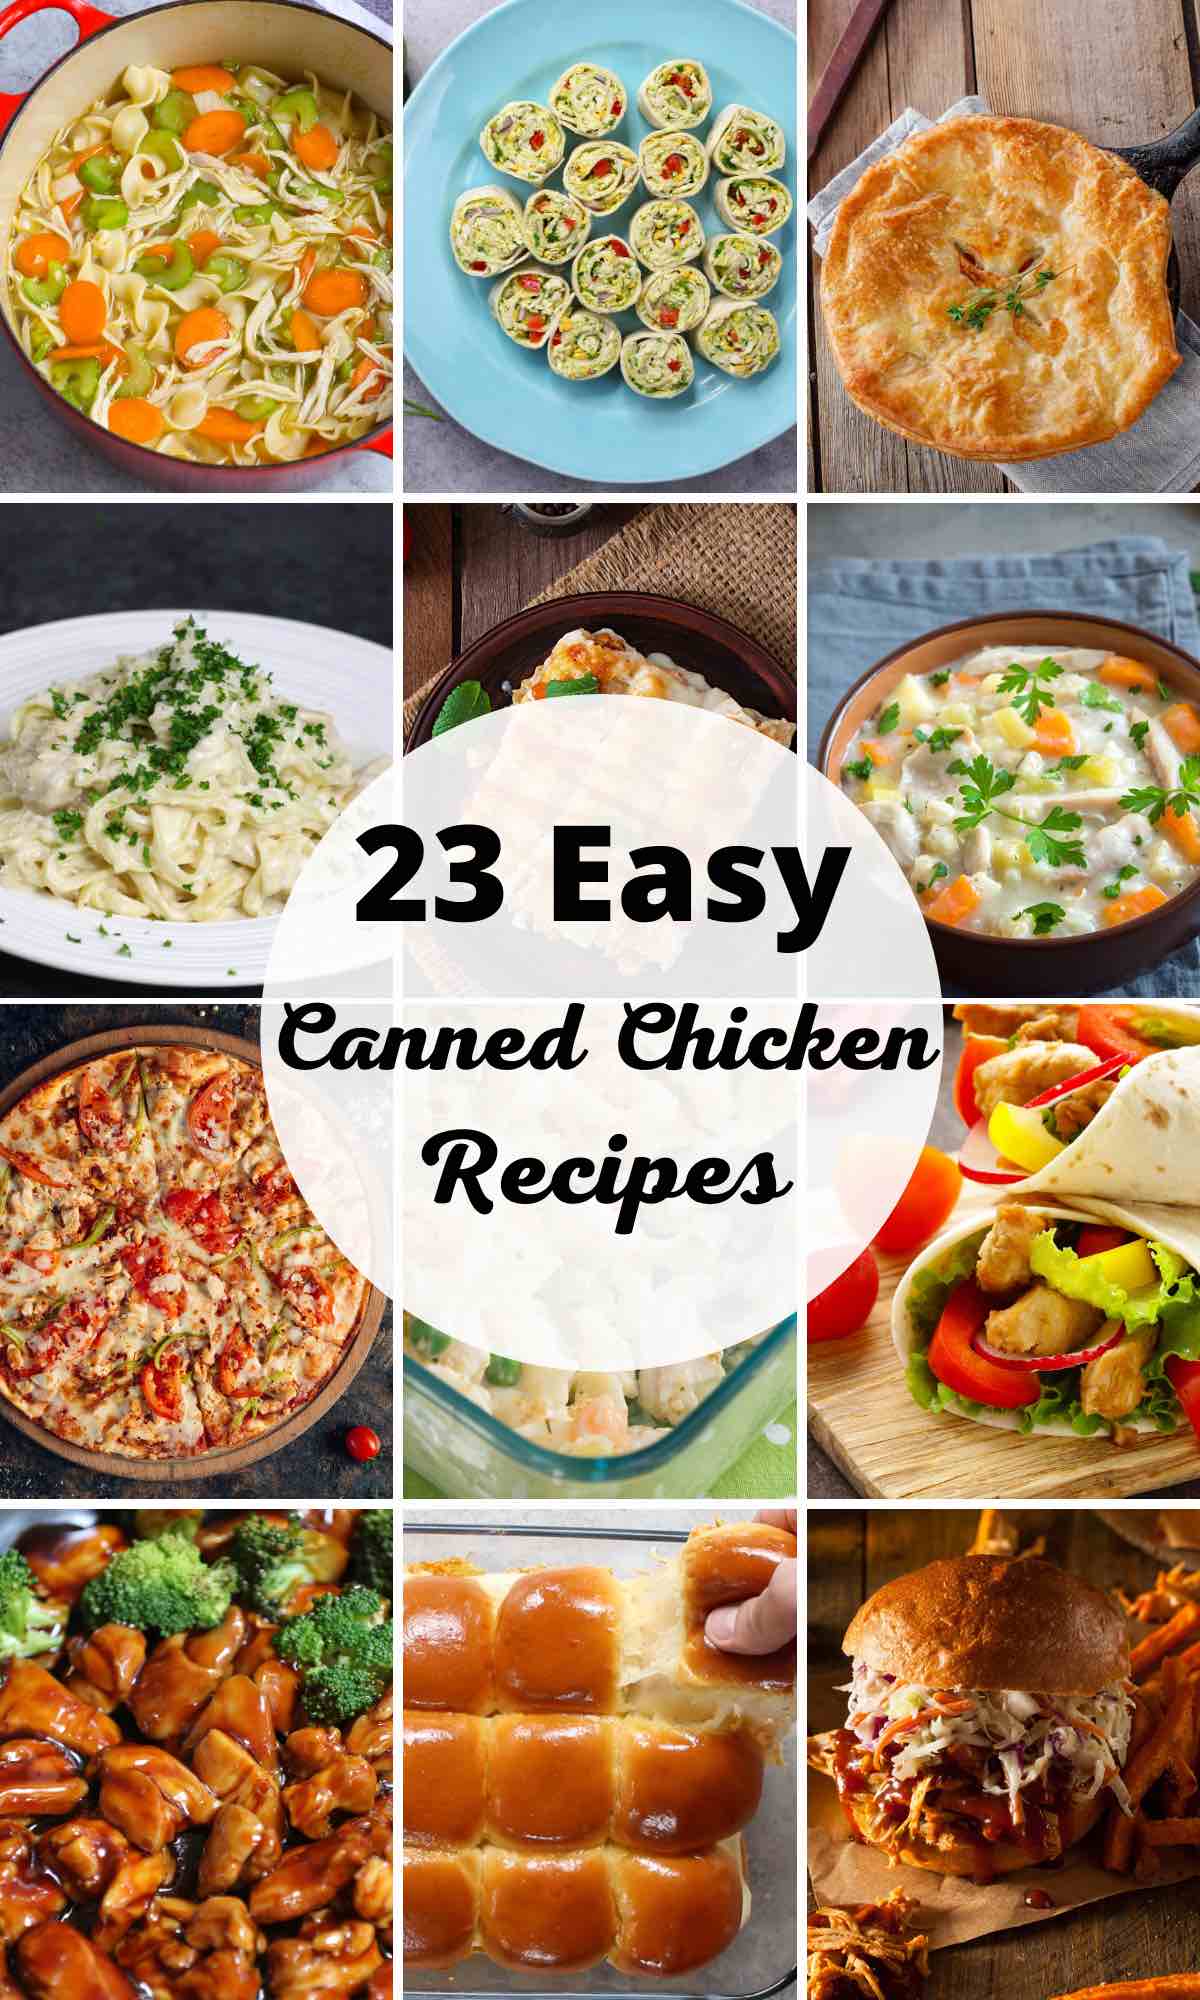 Want to save time in your kitchen and get creative with canned chicken? Here are 23 easy canned chicken recipes to turn this popular protein into something amazing! These recipes include options for breakfast, lunch, and dinner such as hearty soups, cheesy casseroles, and refreshing salads. #CannedChickenRecipes